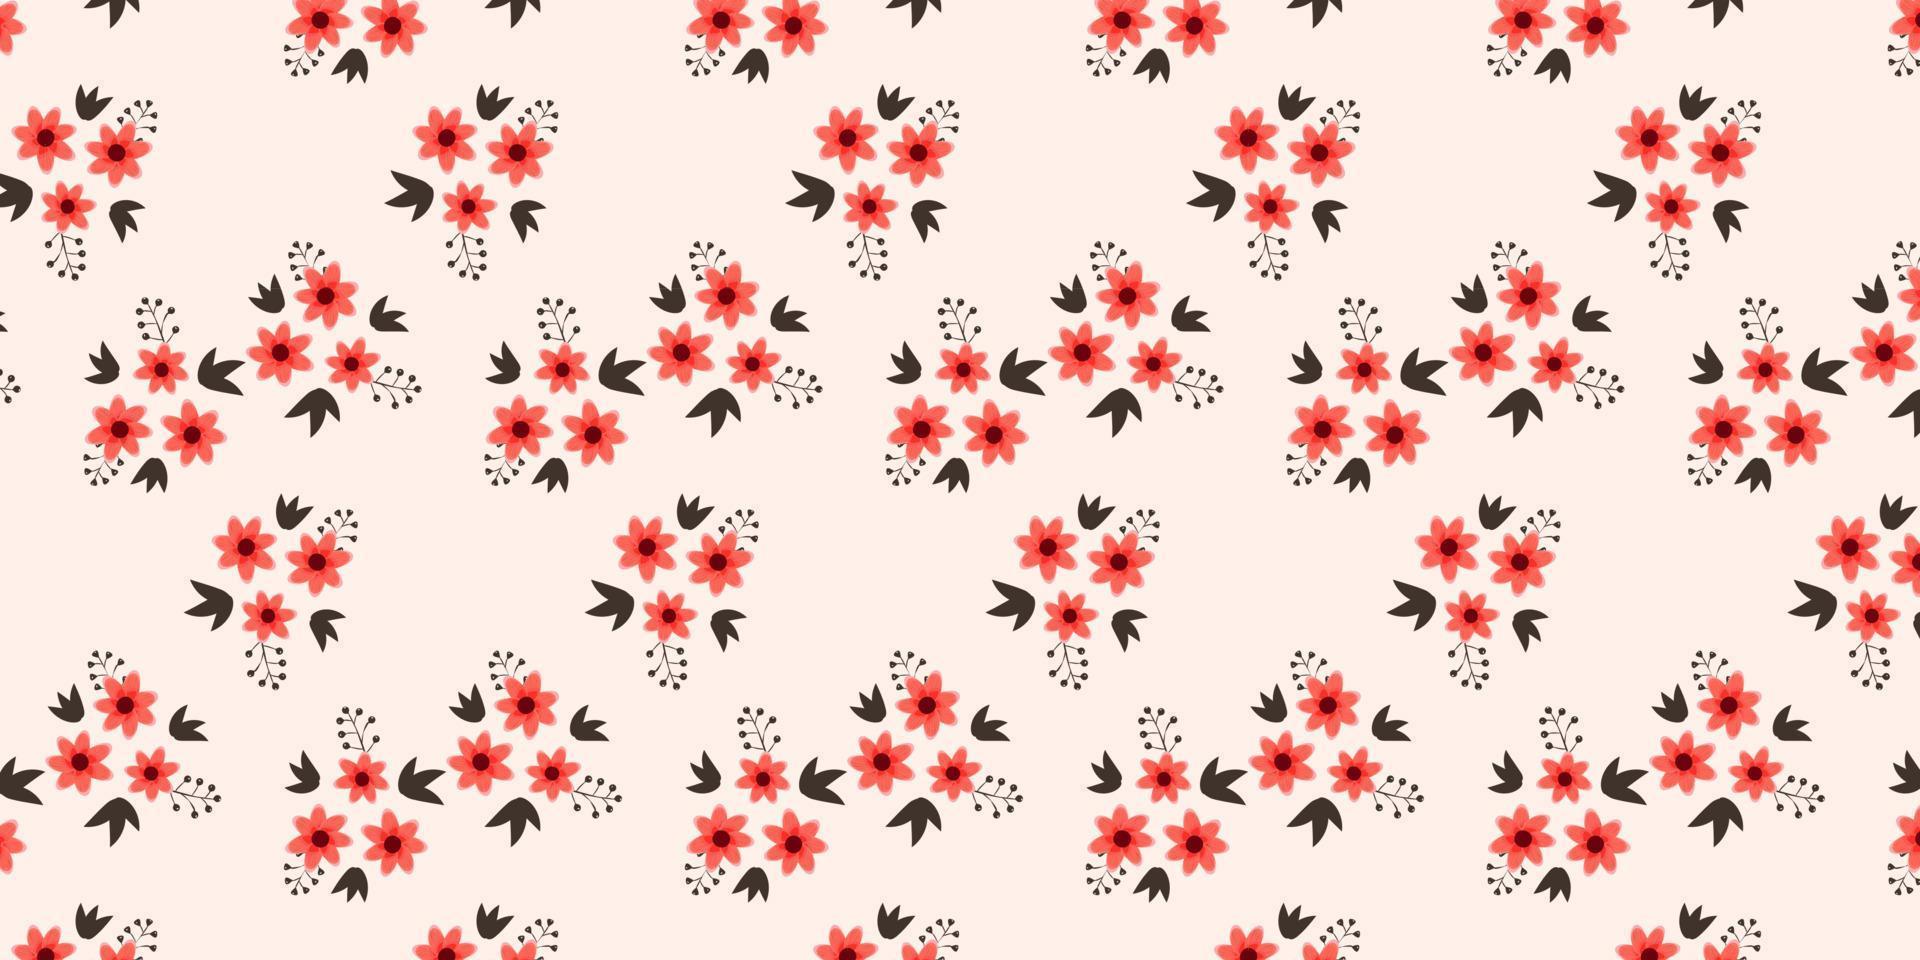 Floral bouquet vector pattern with small flowers and leaves. Find fill pattern on swatches